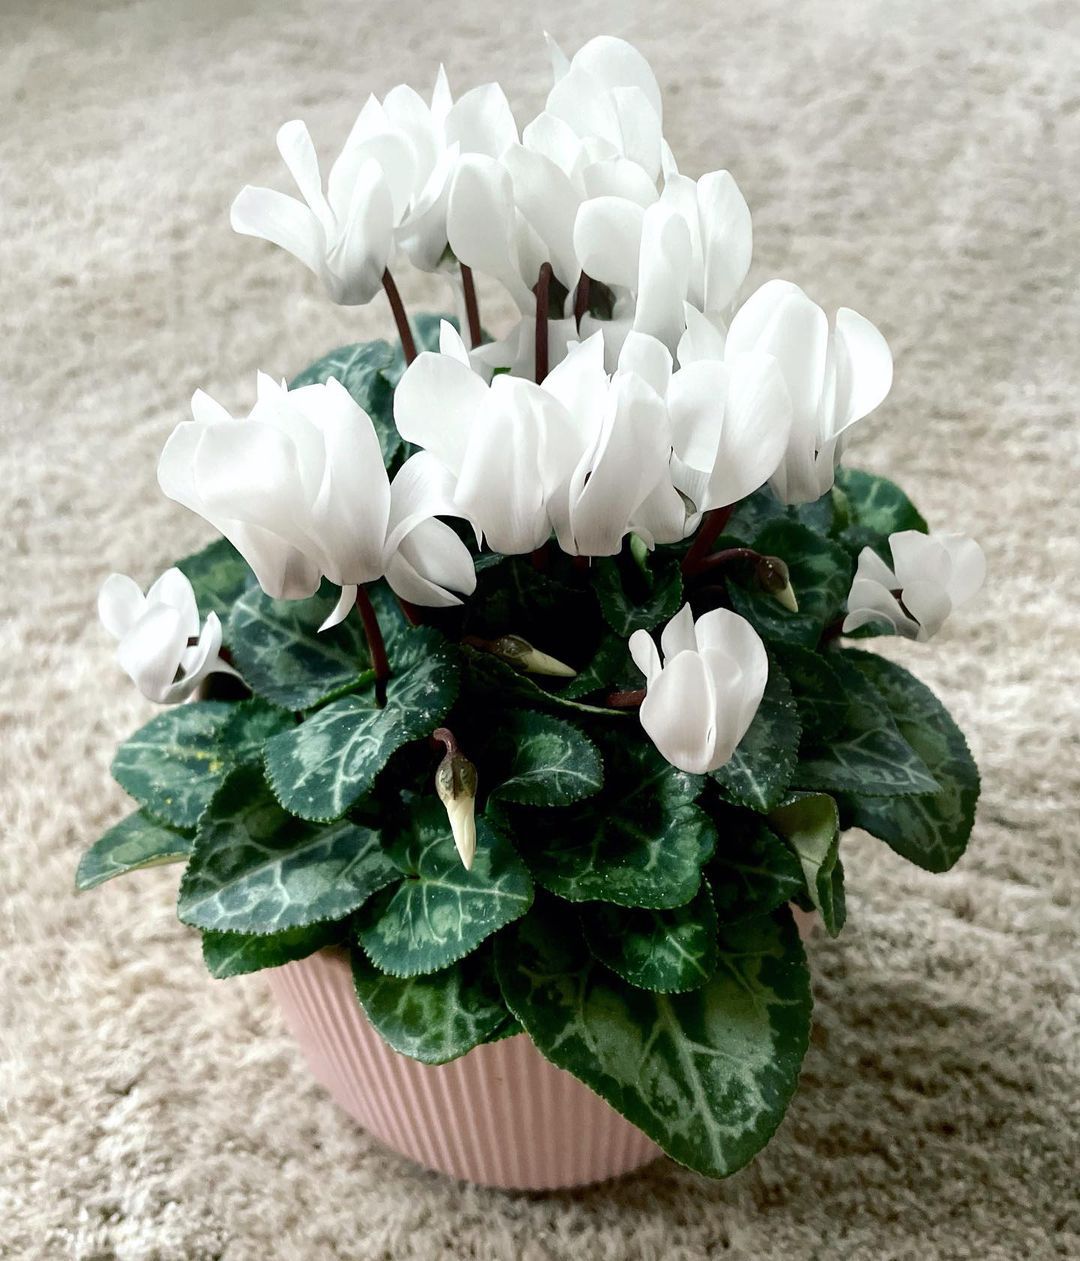 21 Types Of Cyclamen Pictorial Guide